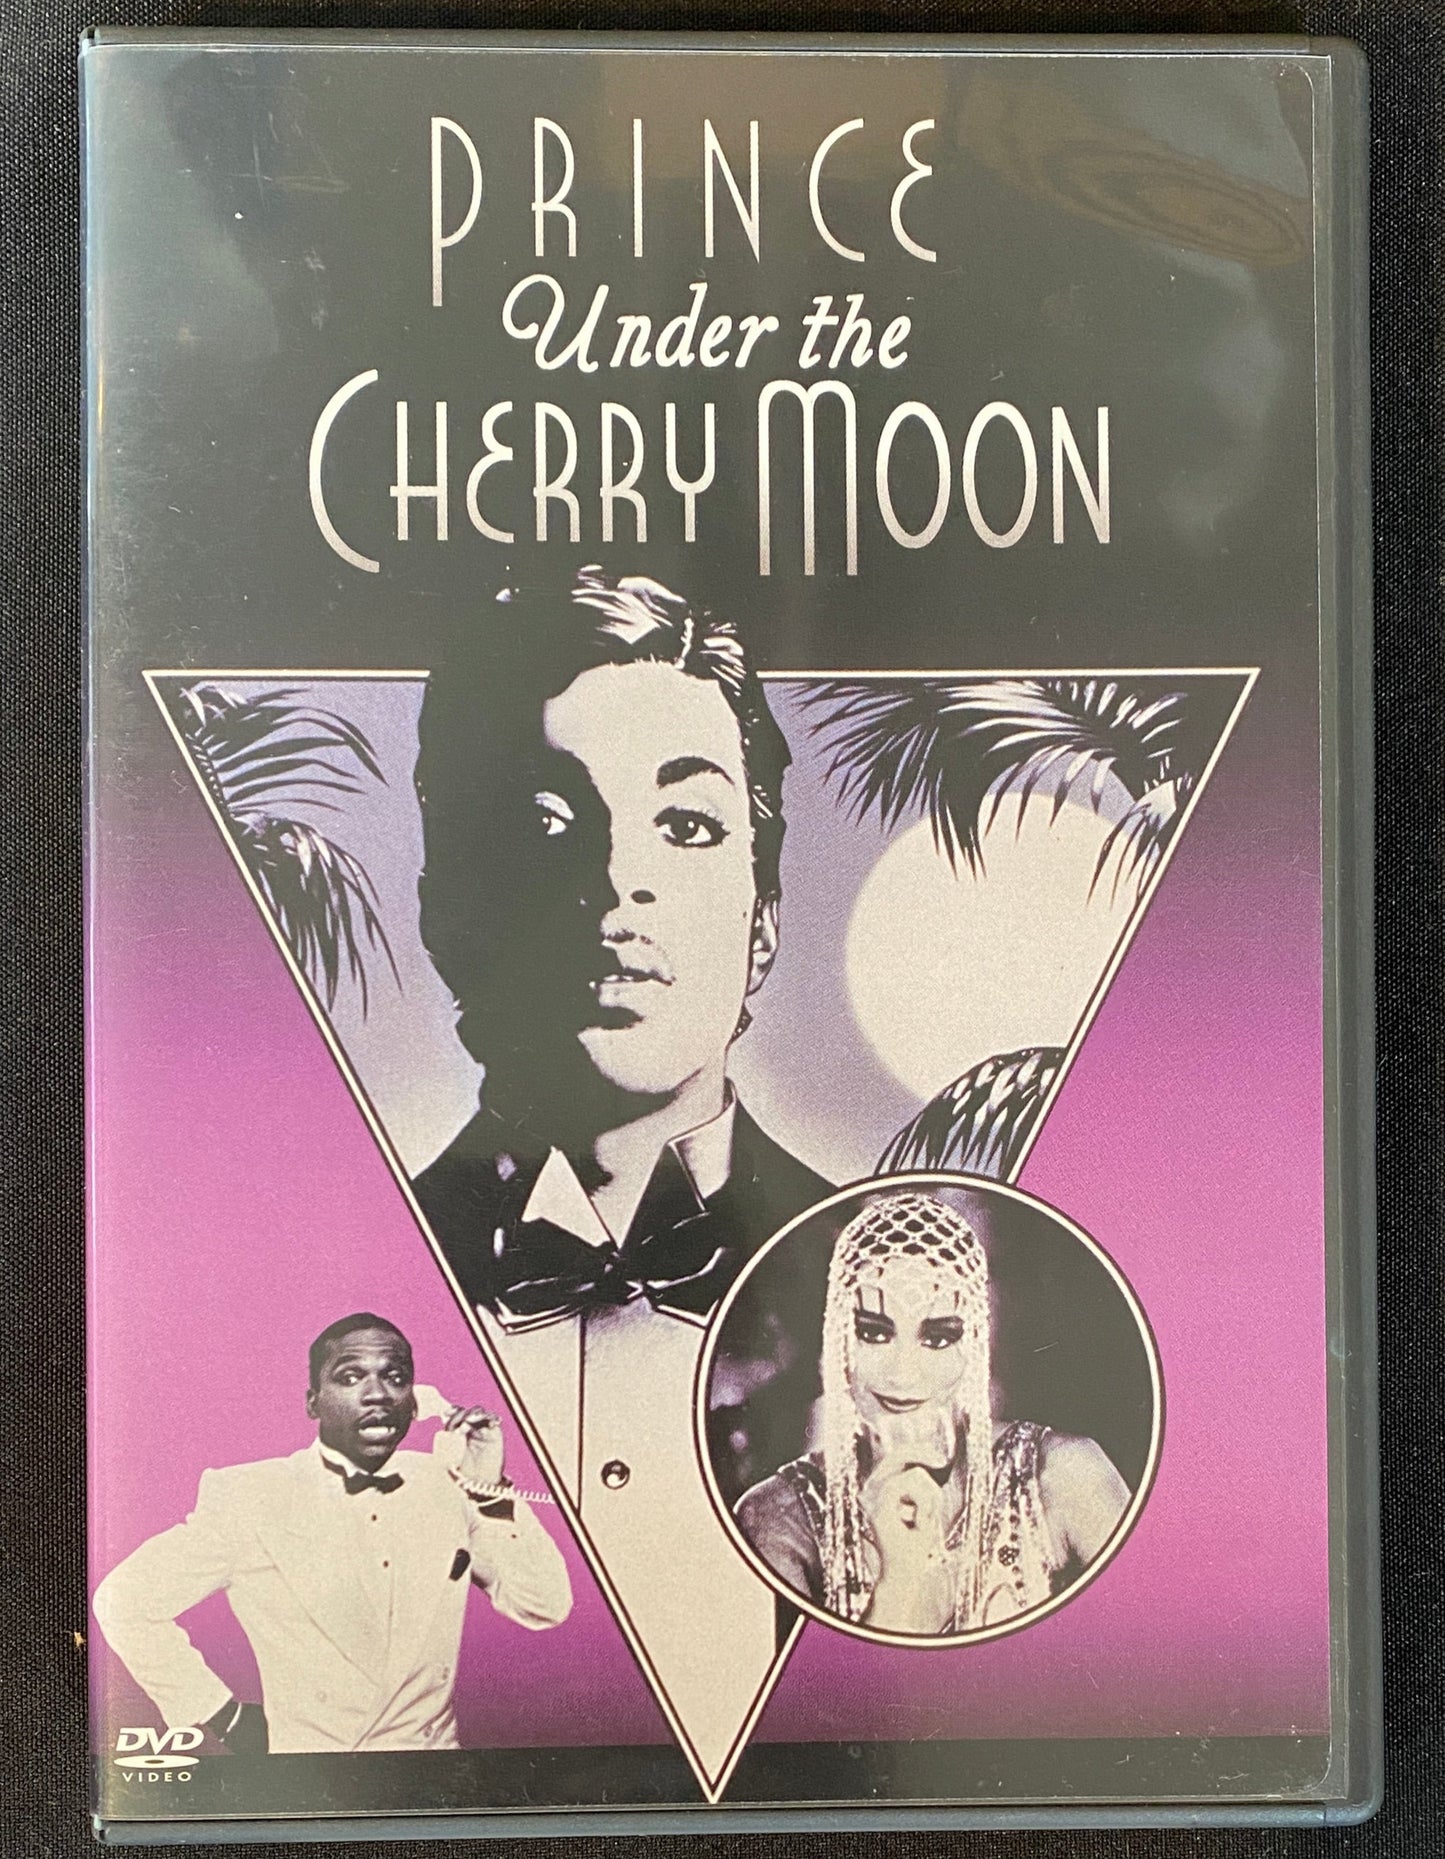 Prince - Under the Cherry Moon